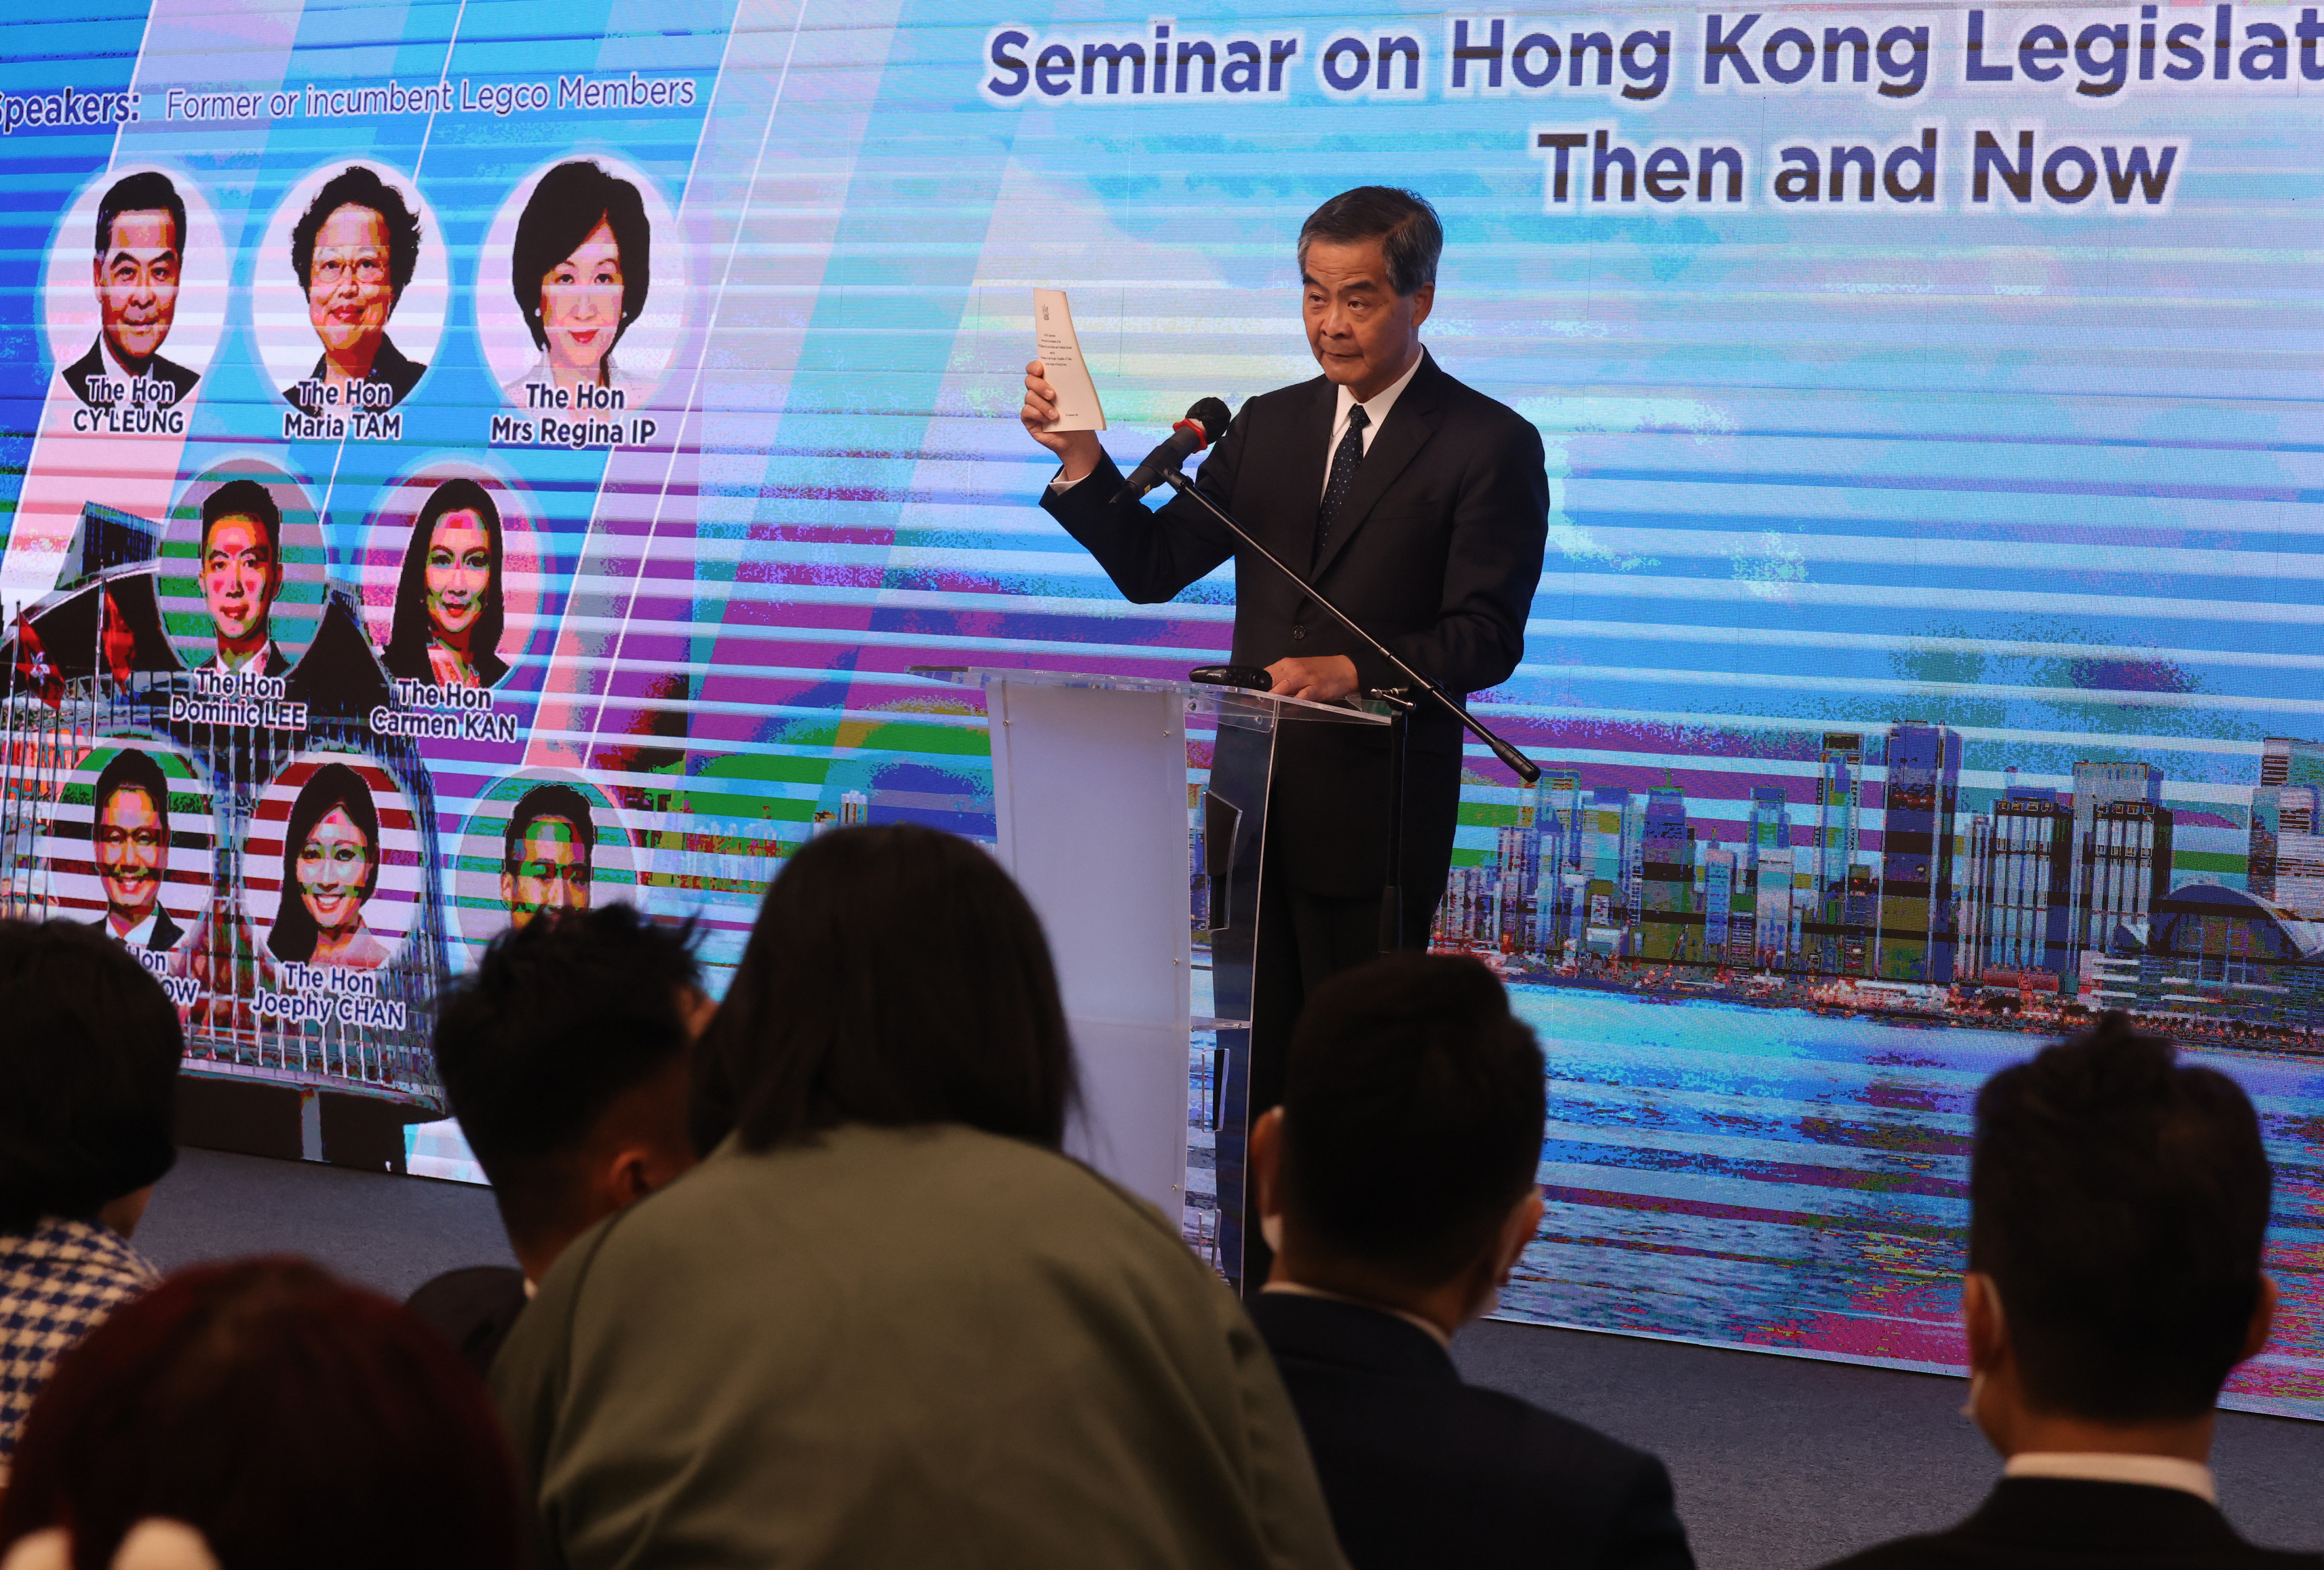 Former city leader CY Leung speaking at a symposium on Friday. Photo: Jonathan Wong